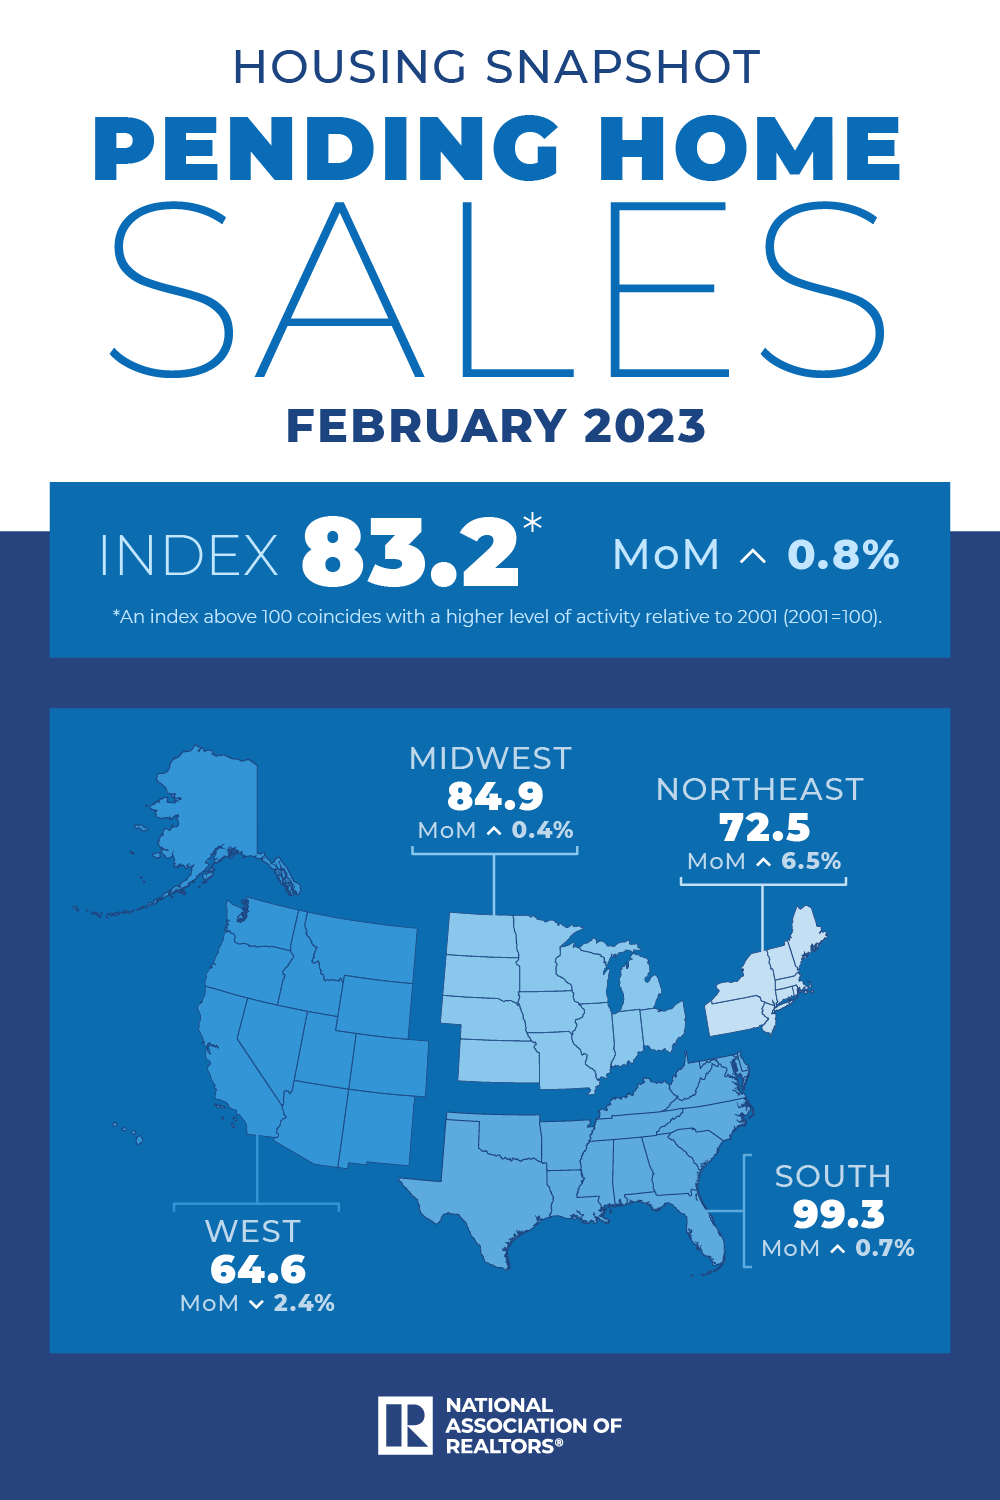 Pending Home Sales, February 2023